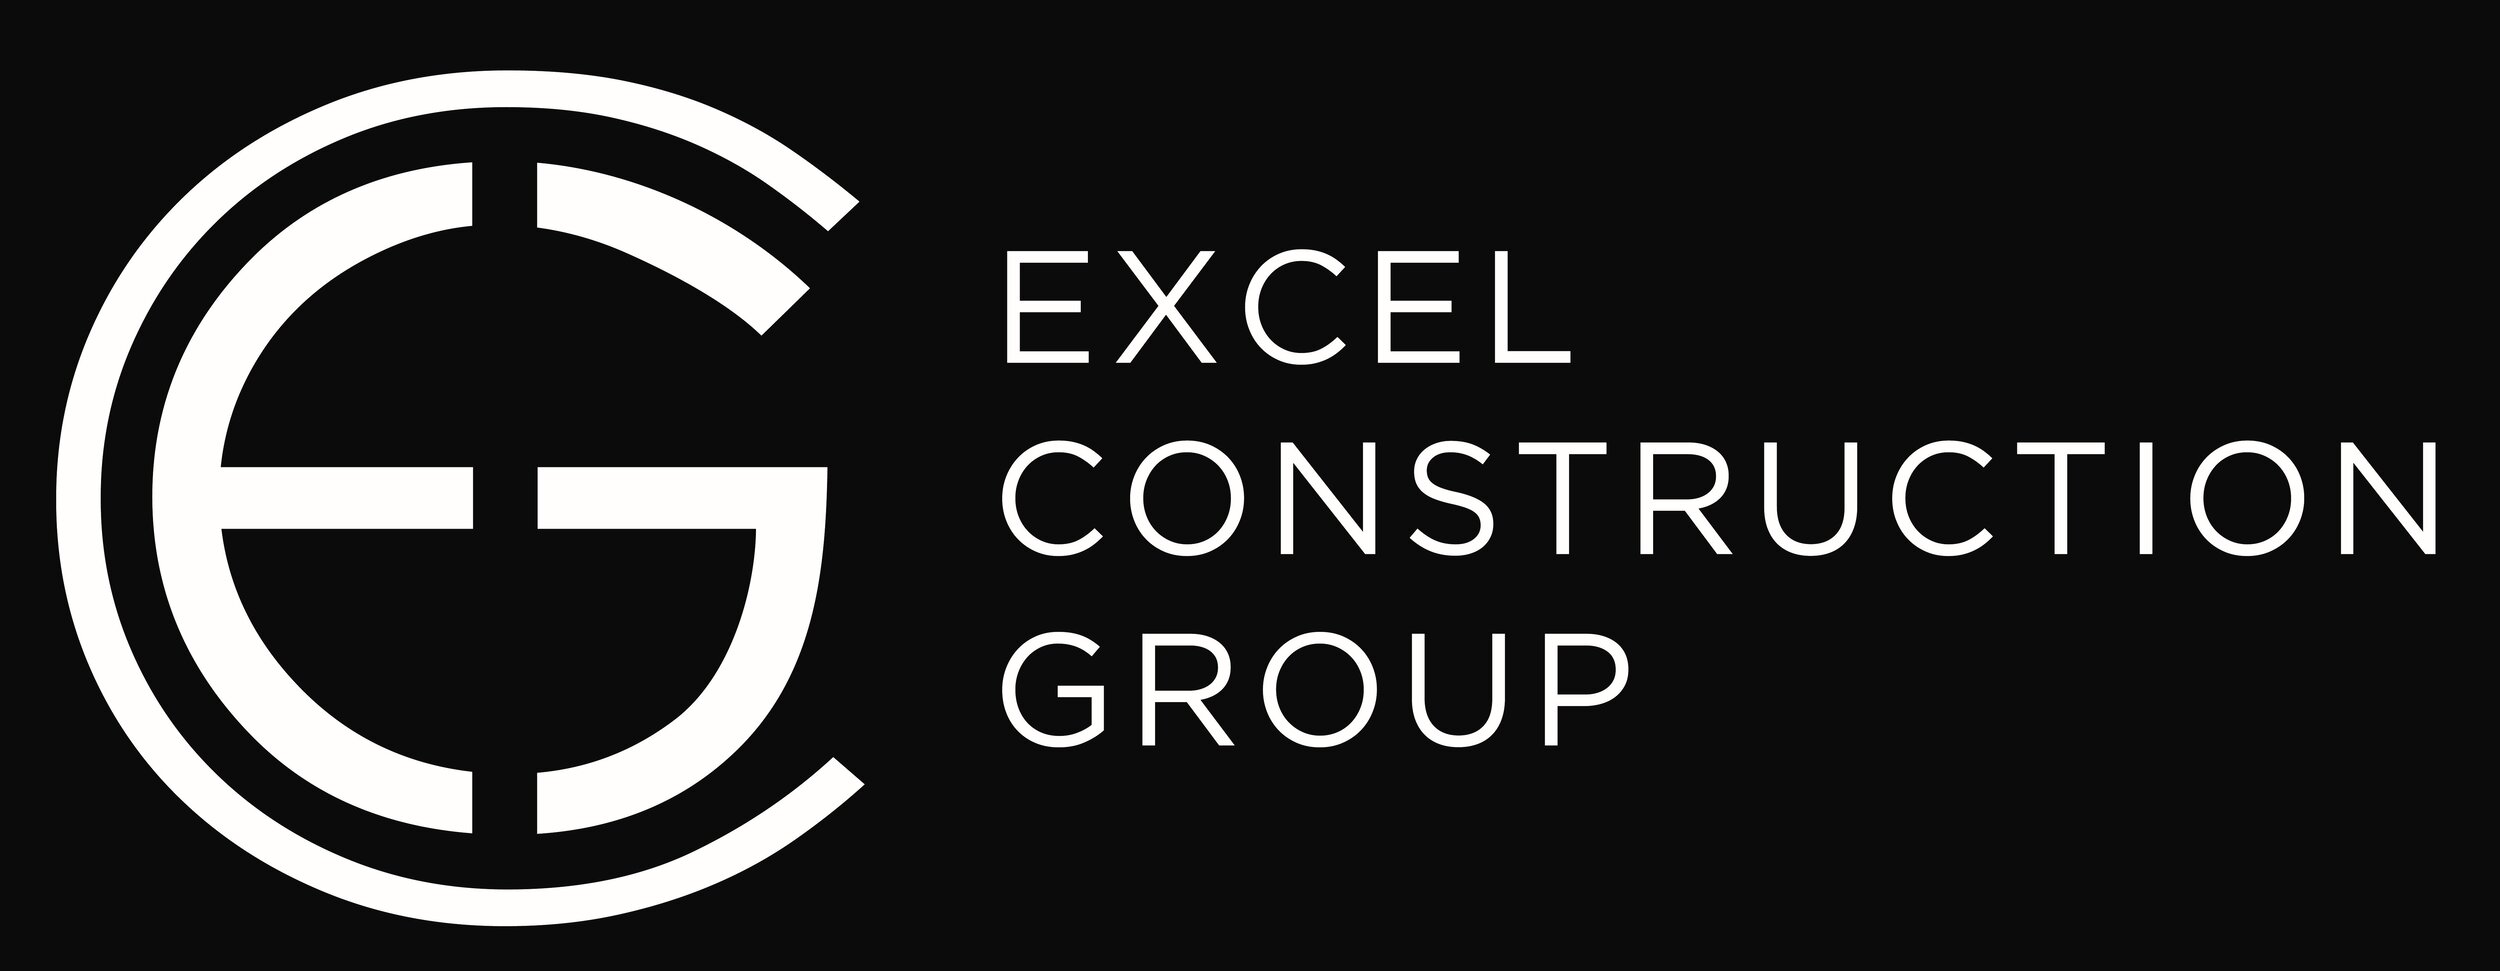 EXCEL CONSTRUCTION GROUP